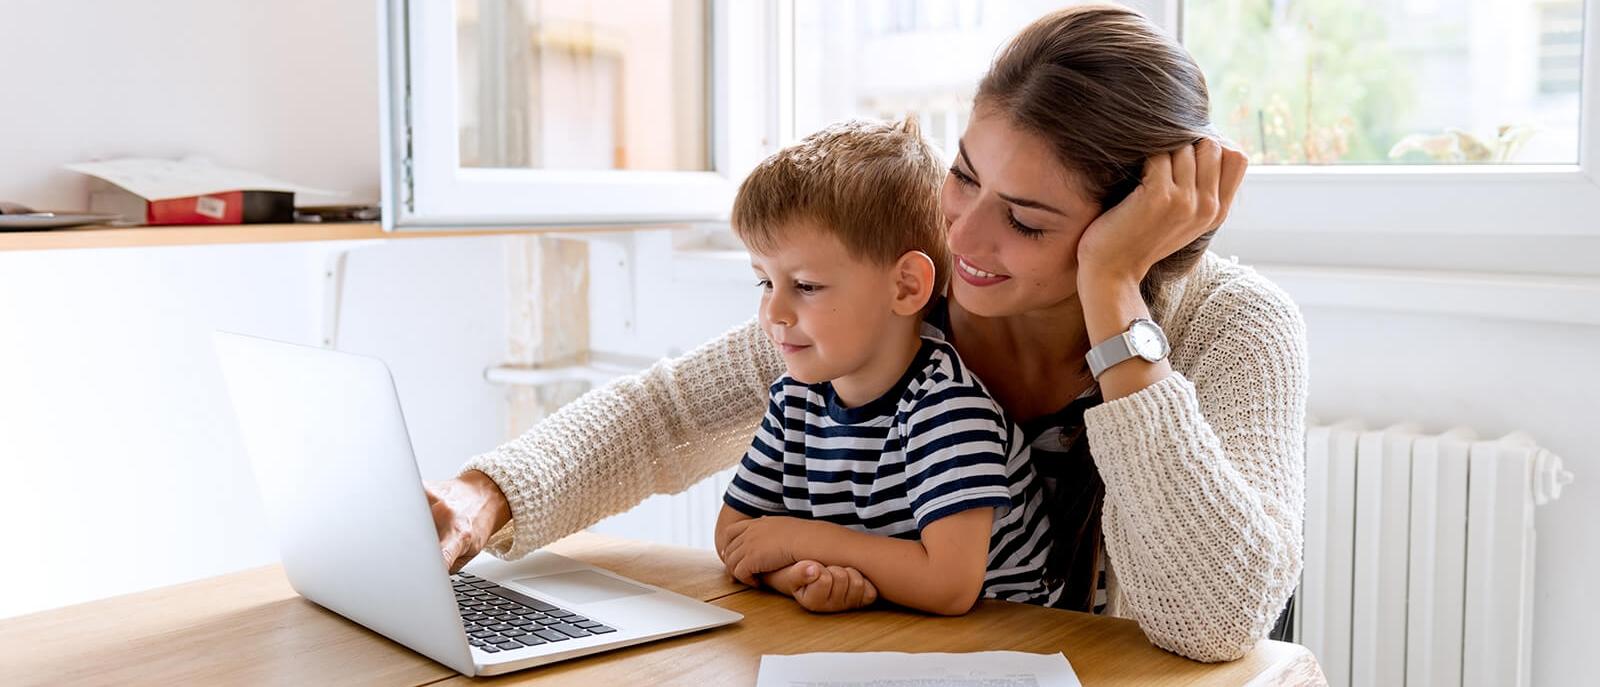 Mother and son at home using a laptop computer